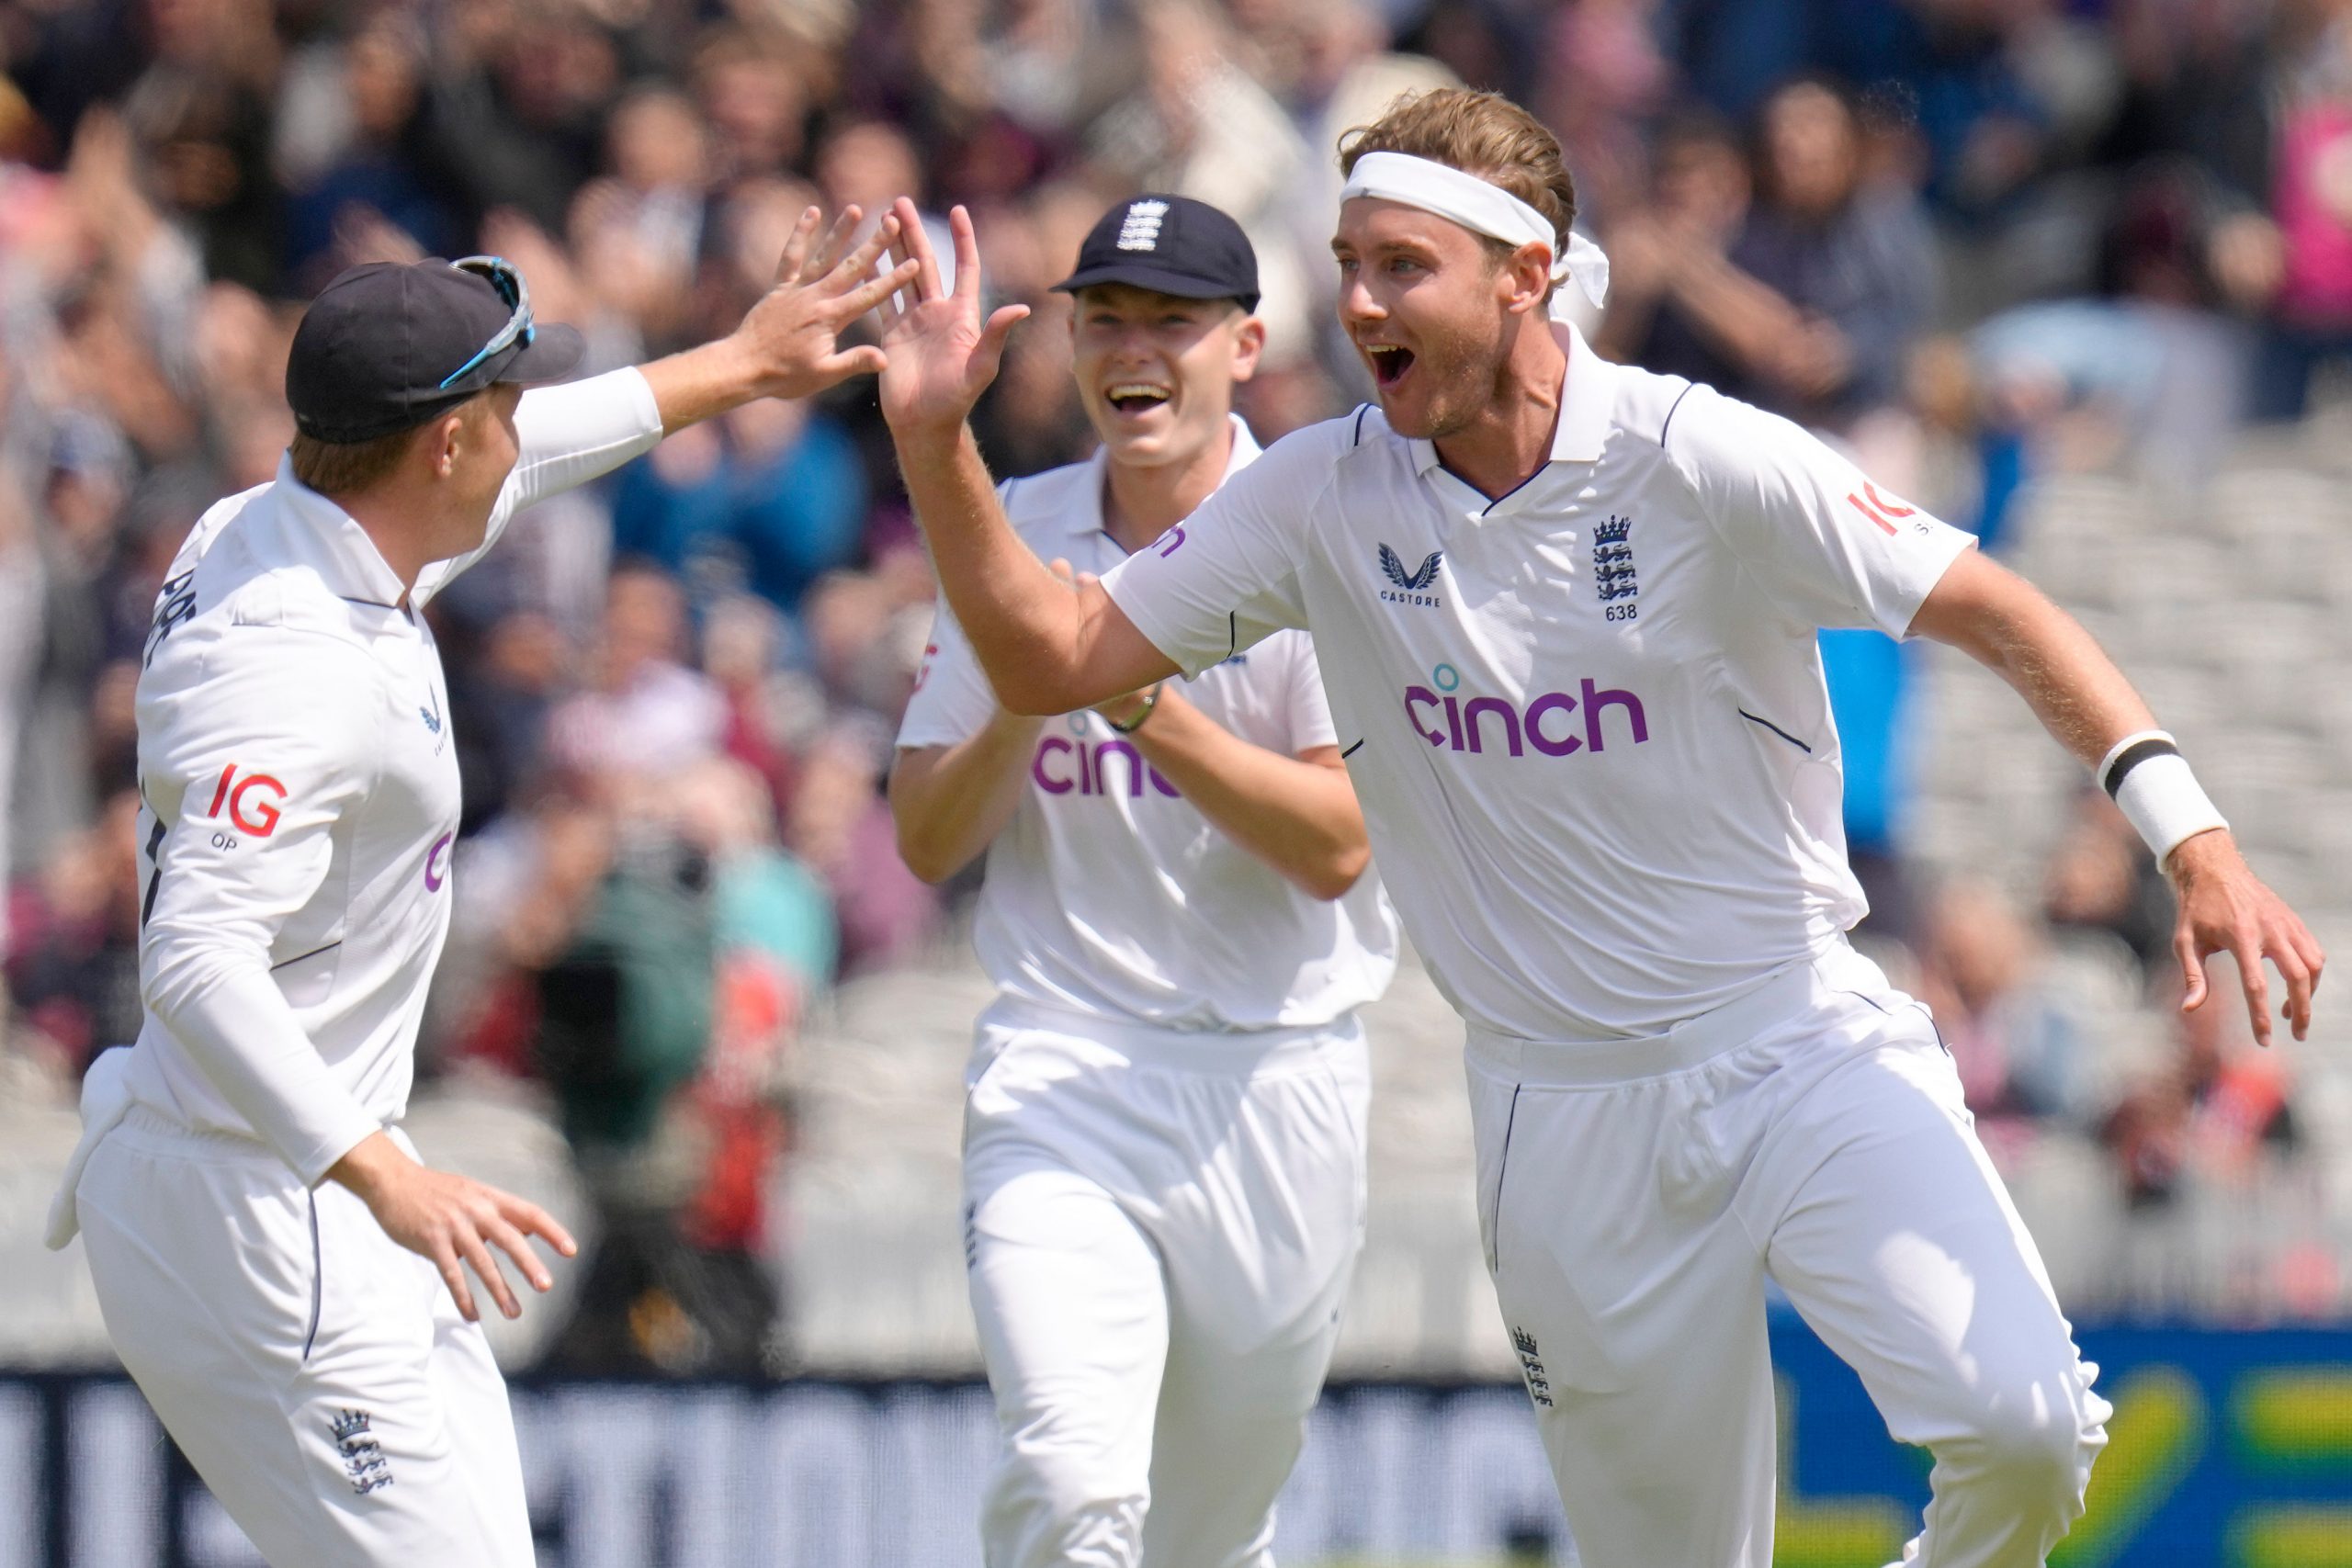 Broad has no beef with former England captain Joe Root over selection snub